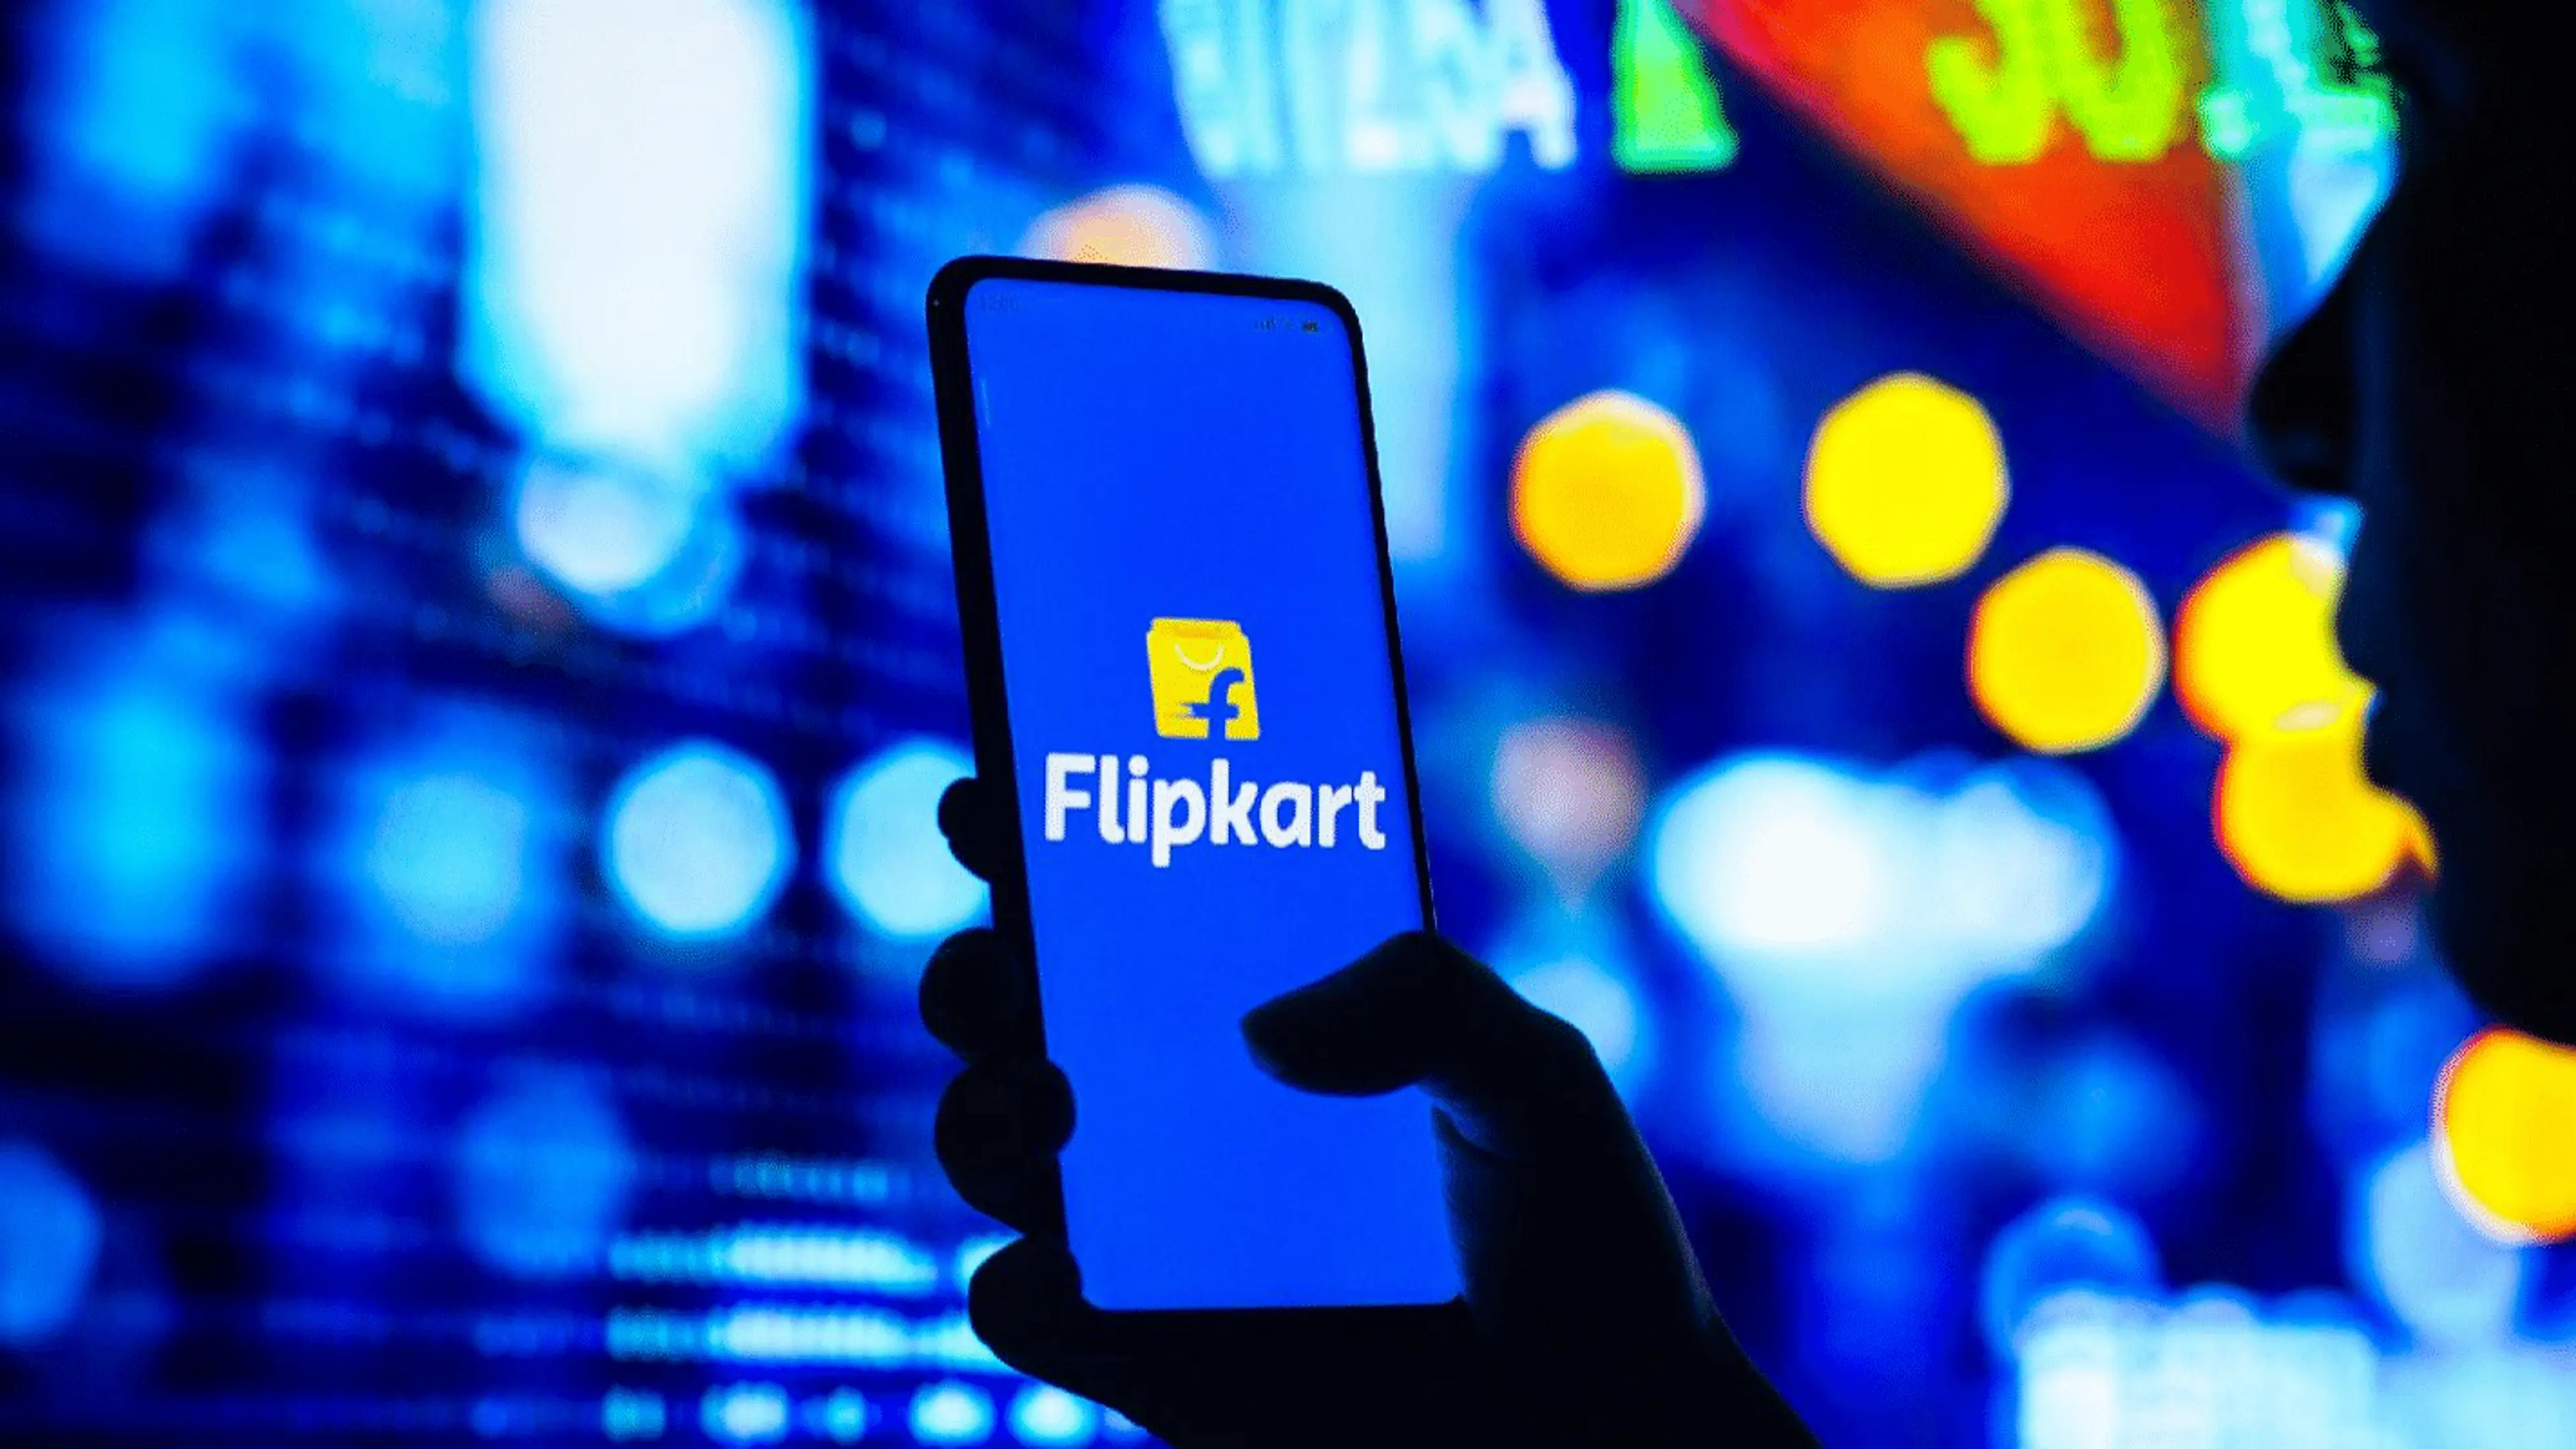 Indians spent over 2M hours on Flipkart’s video commerce offering in the past year